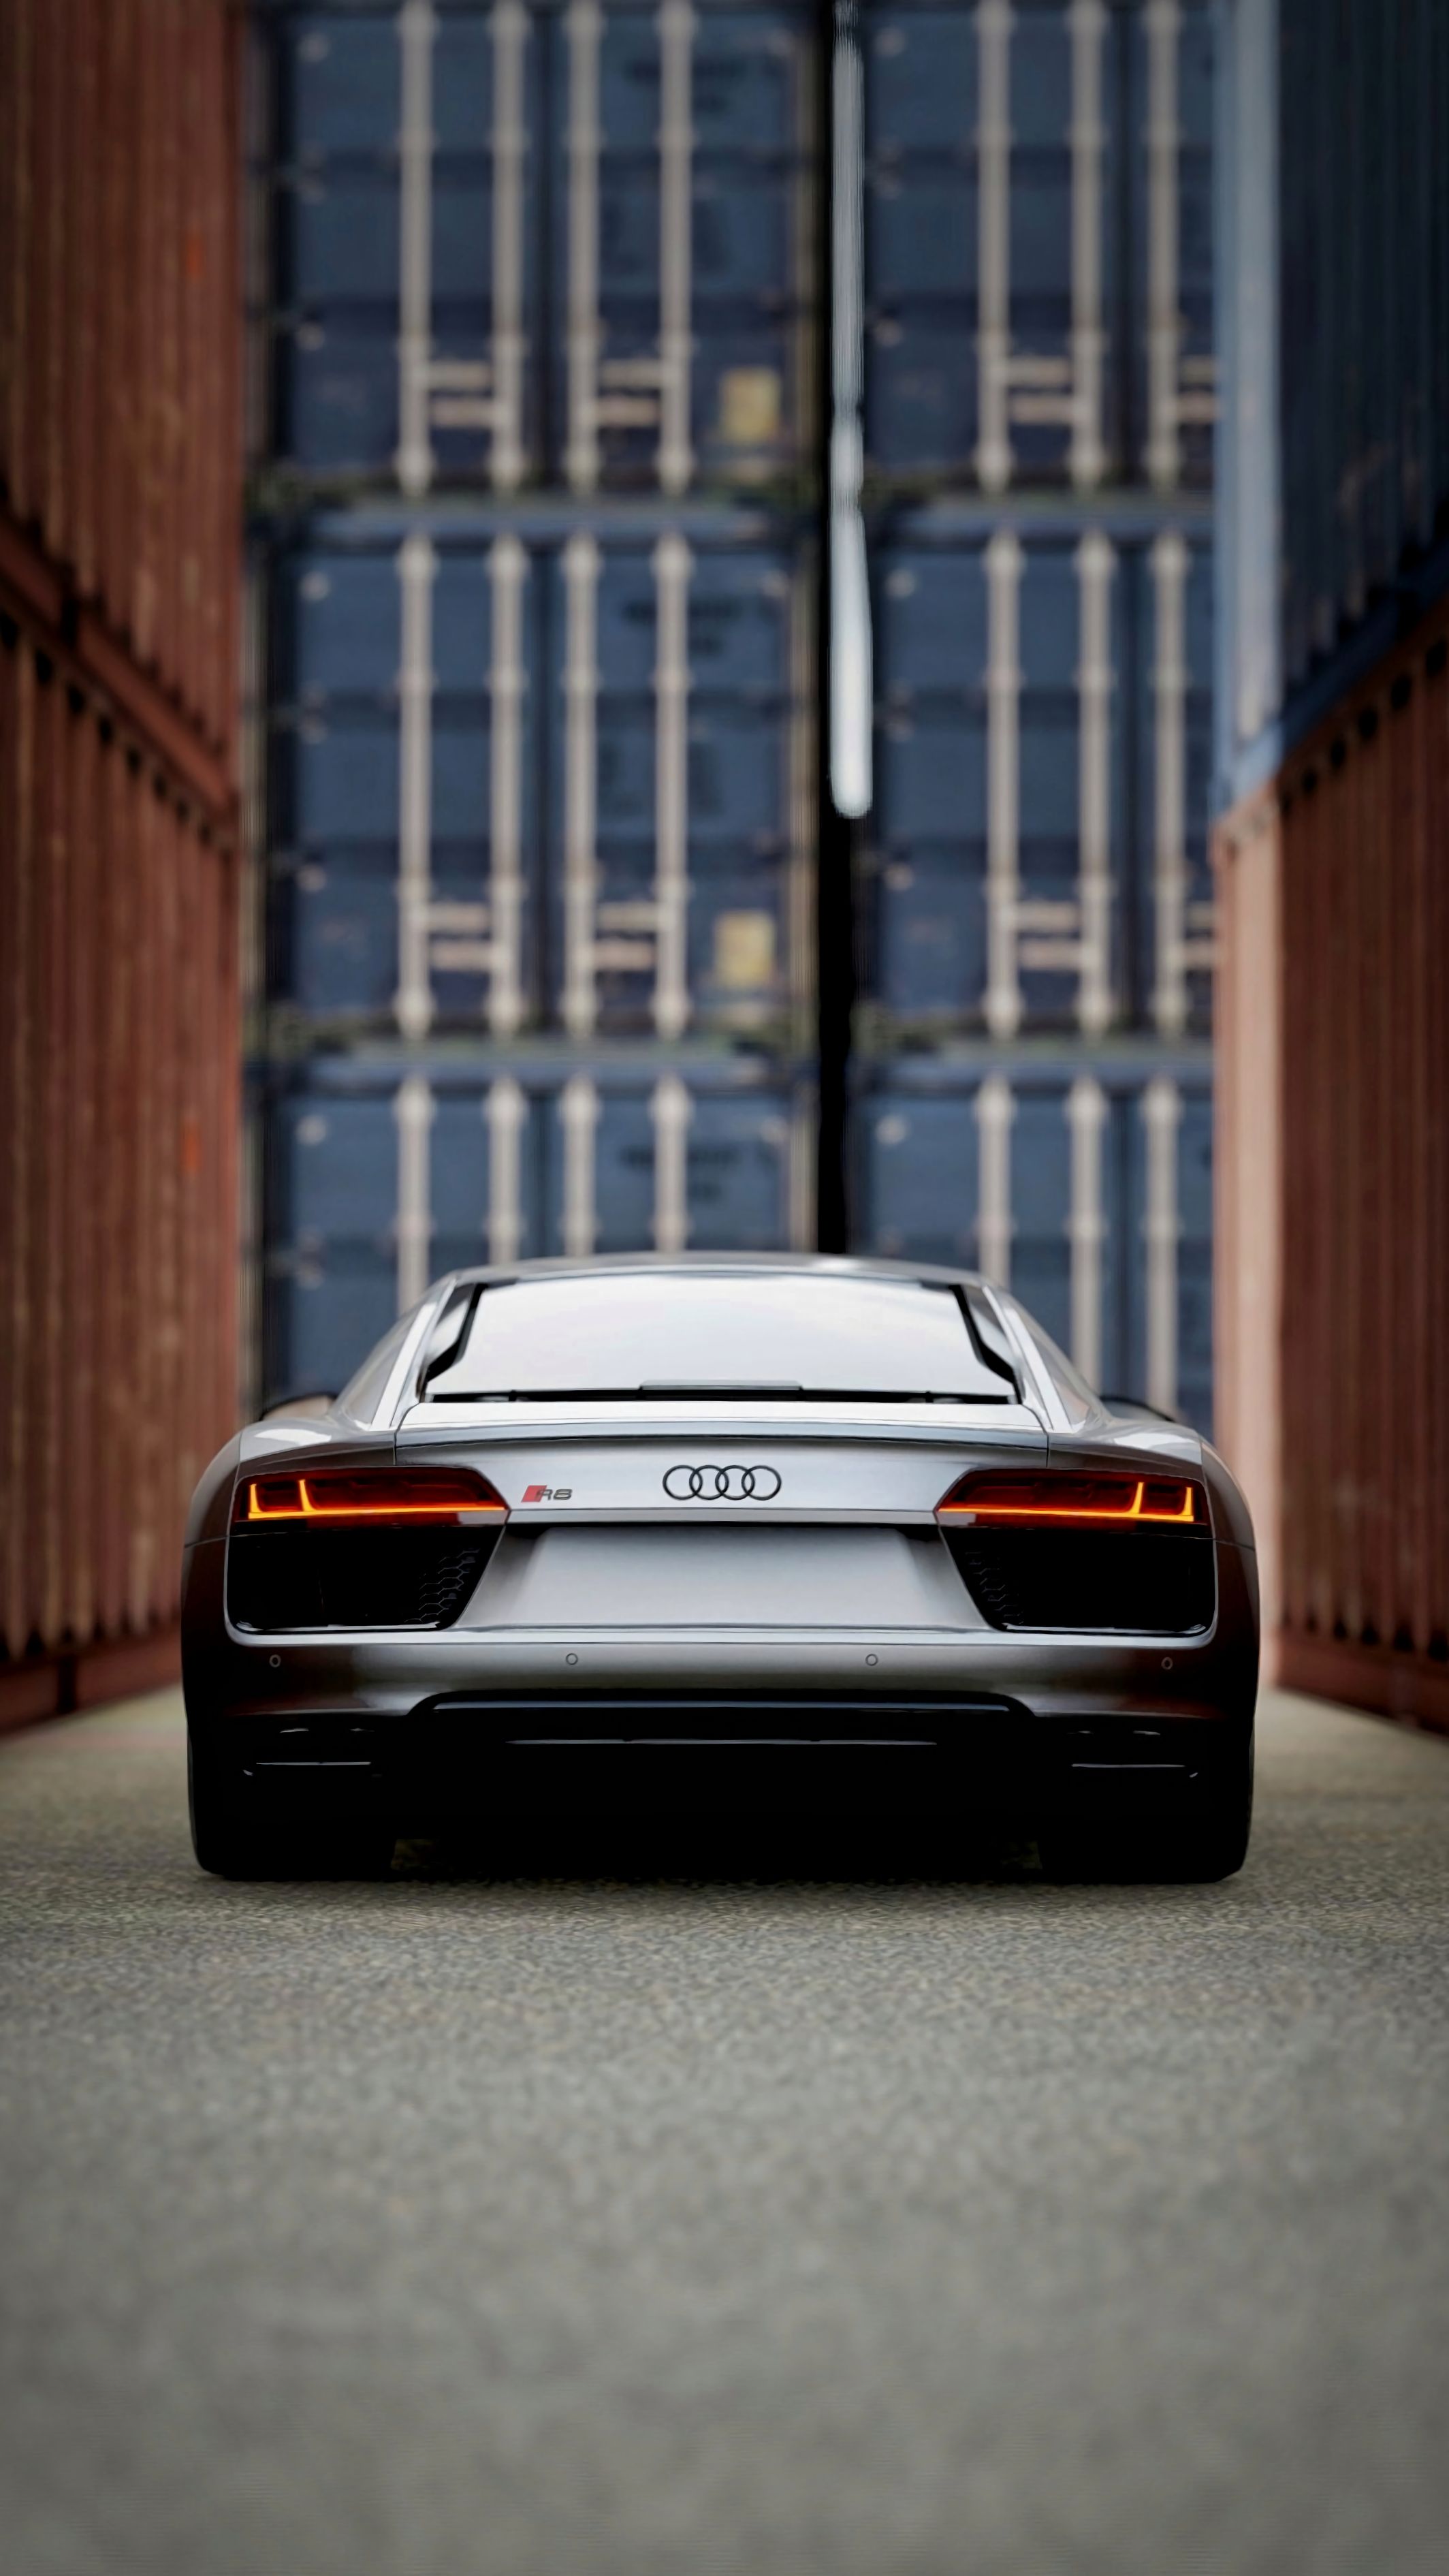 85682 Screensavers and Wallpapers Rear View for phone. Download cars, audi, sports, sports car, back view, rear view pictures for free